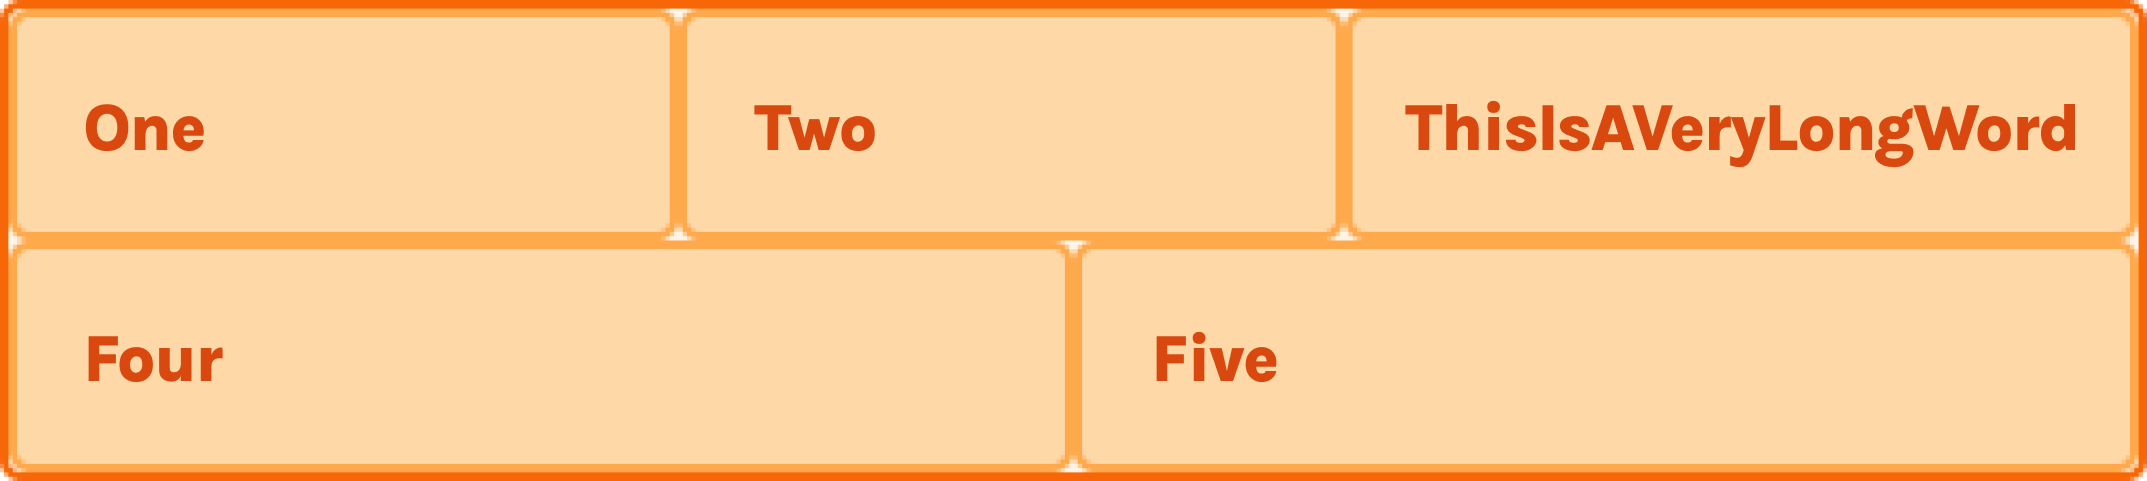 The same 5 elements but now 1 and 2 have shrunk slightly and 3 has grown slightly due to it's content.